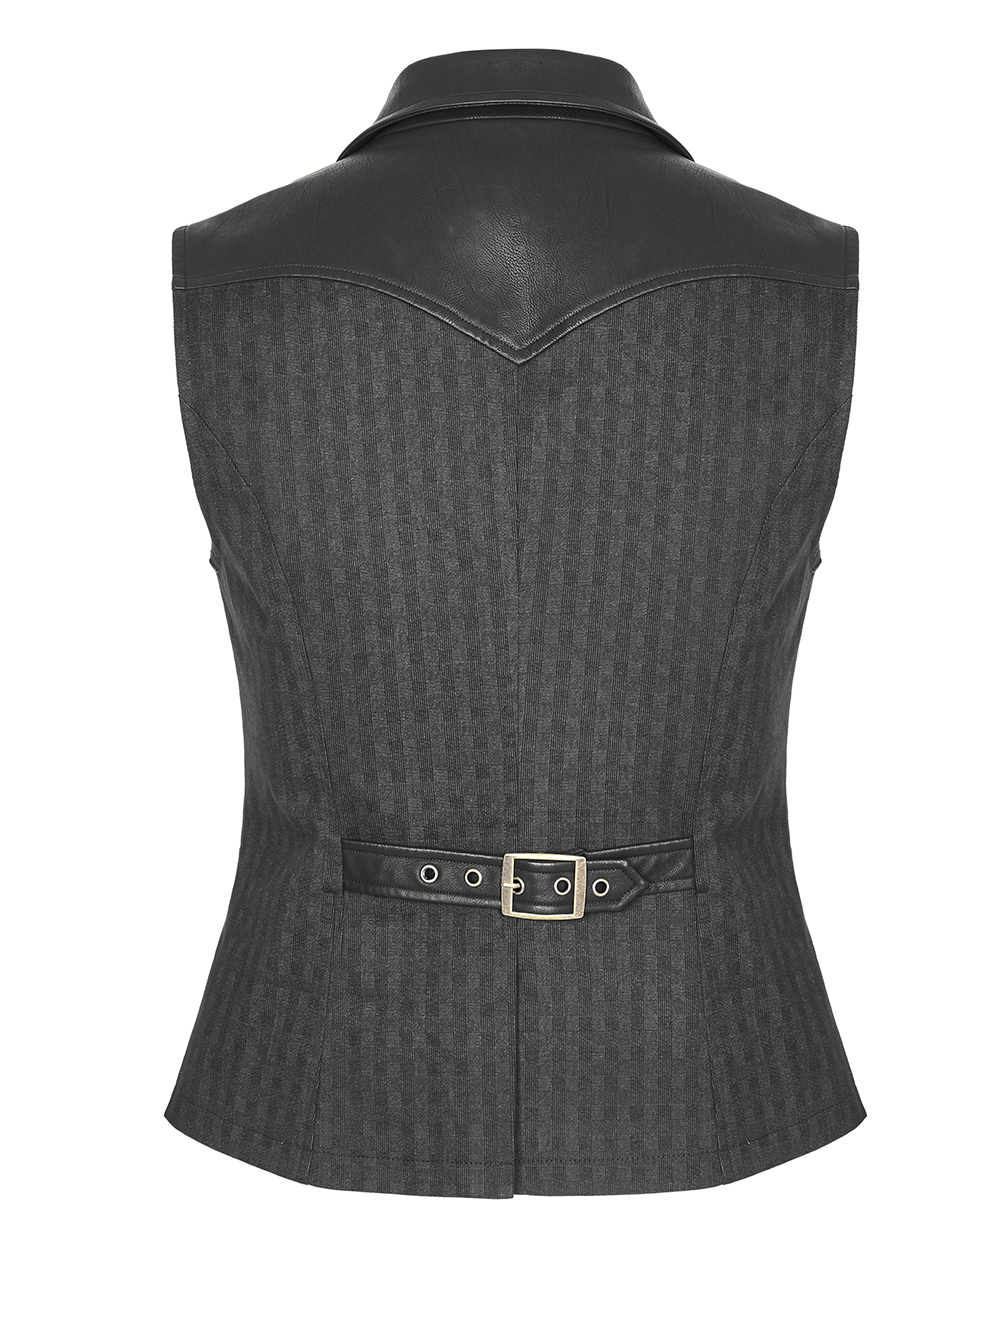 Gothic Striped PU Leather Buckle Waistcoat for Men - HARD'N'HEAVY